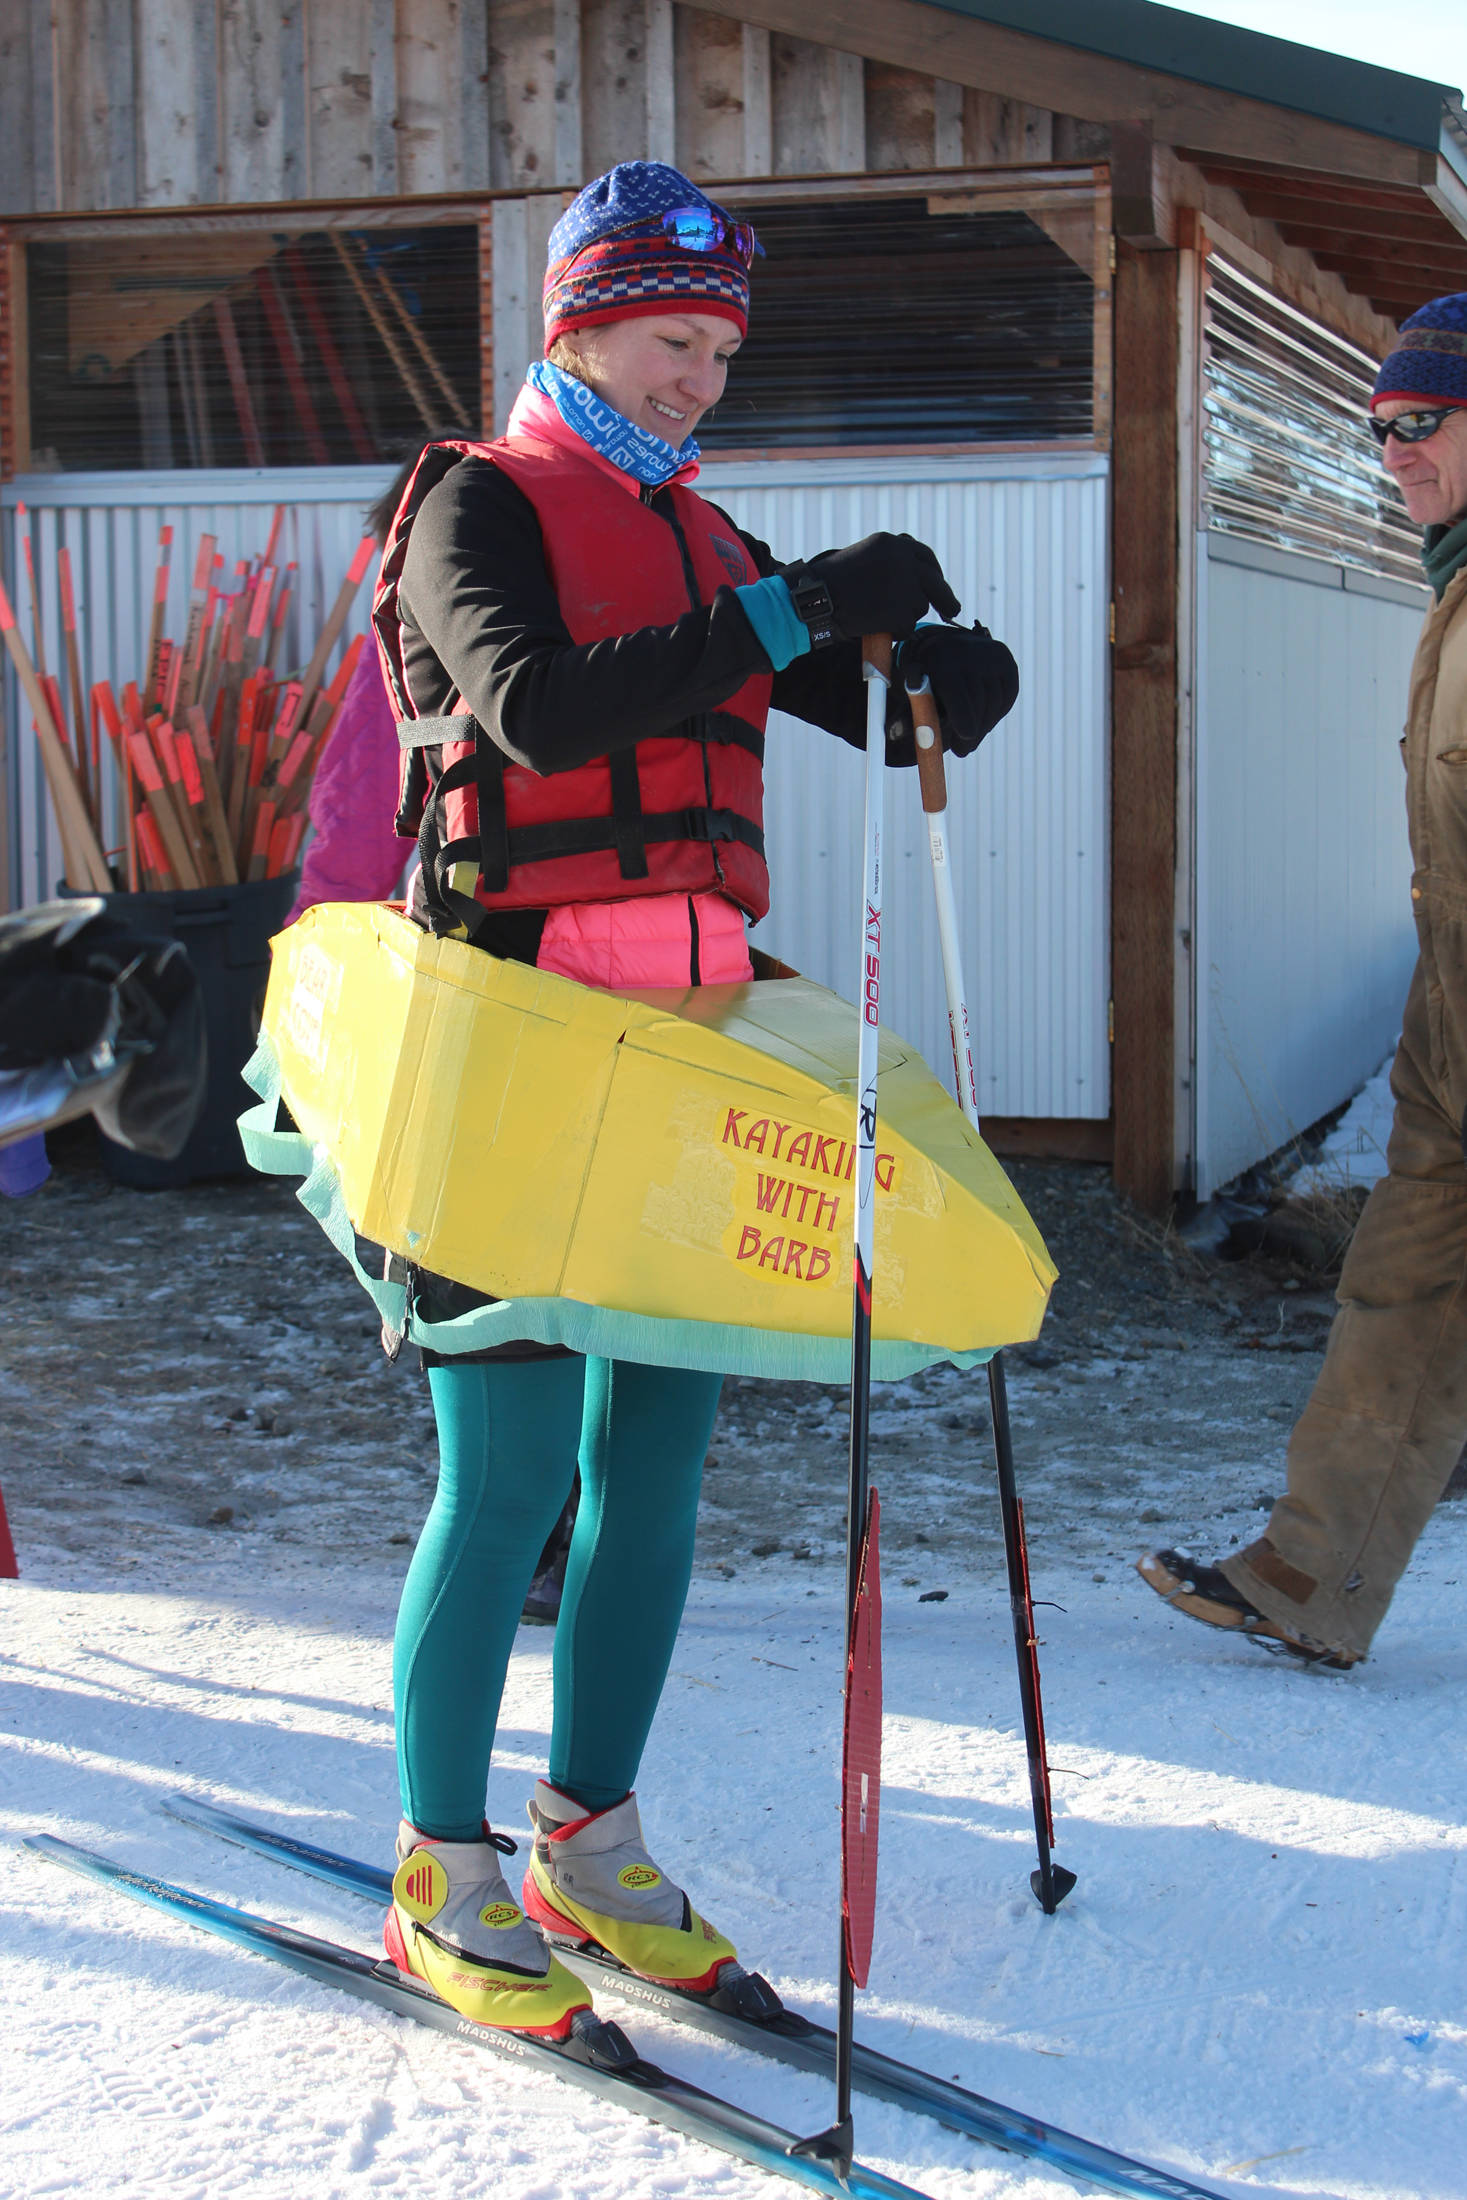 Alina Rykaczewski prepares for the 2018 Homer Ski for Women in her kayak costume Sunday, Feb. 4, 2018 at the Lookout Mountain Ski Trials. Her costume was dedicated to the late Barb Hrenchir, an avid local skier and kayaker. (Photo by Megan Pacer/Homer News)